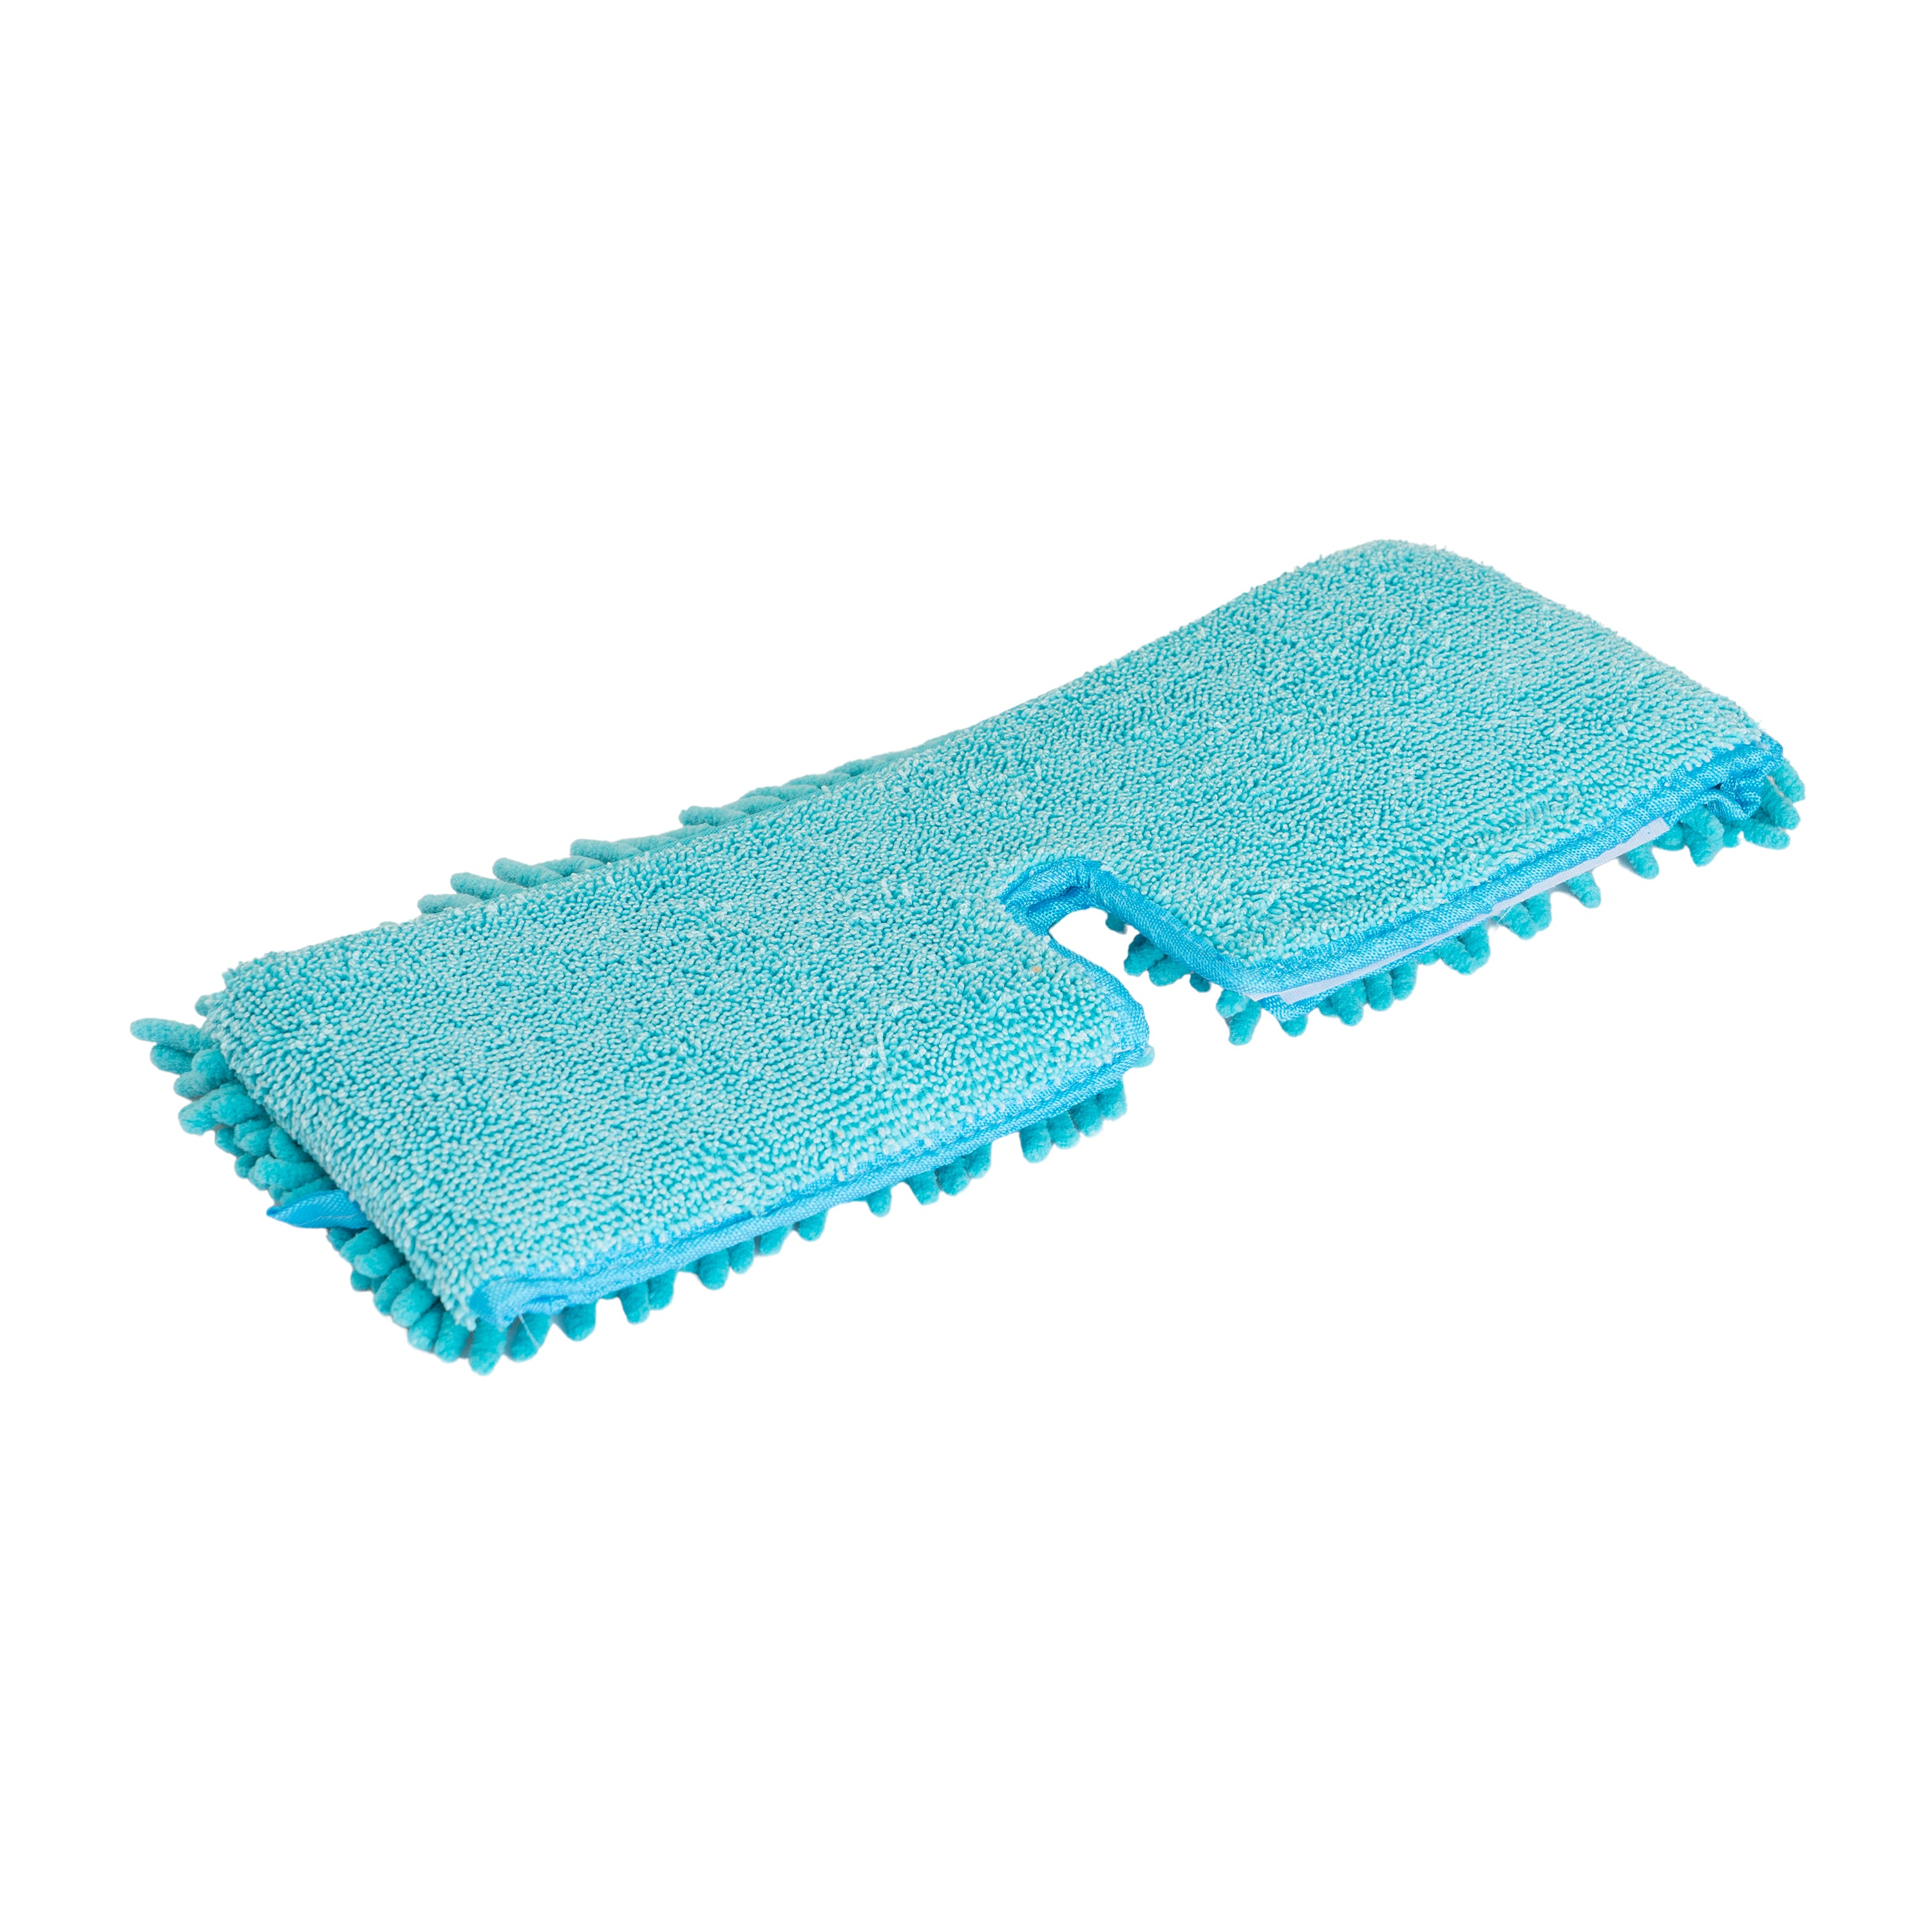 Dynamic Duo Micro Mop Replacement Head - No Frame - Teal